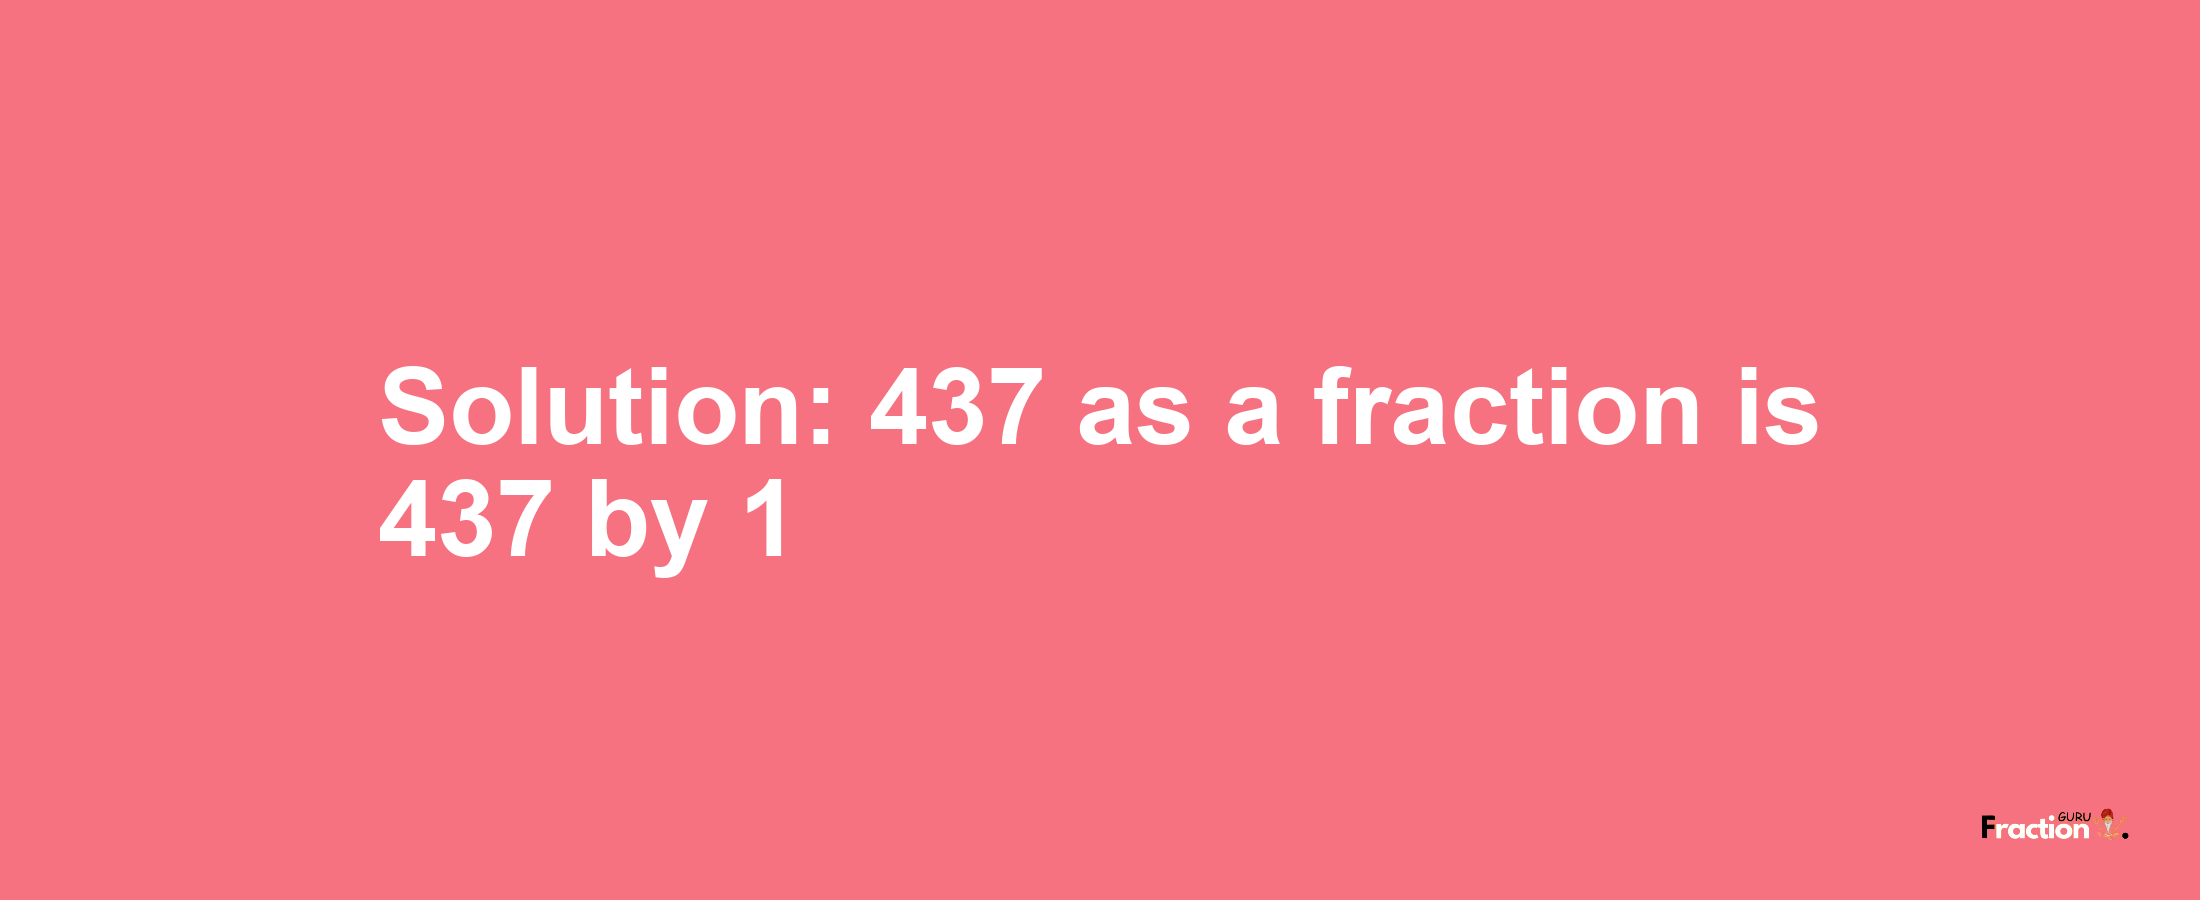 Solution:437 as a fraction is 437/1